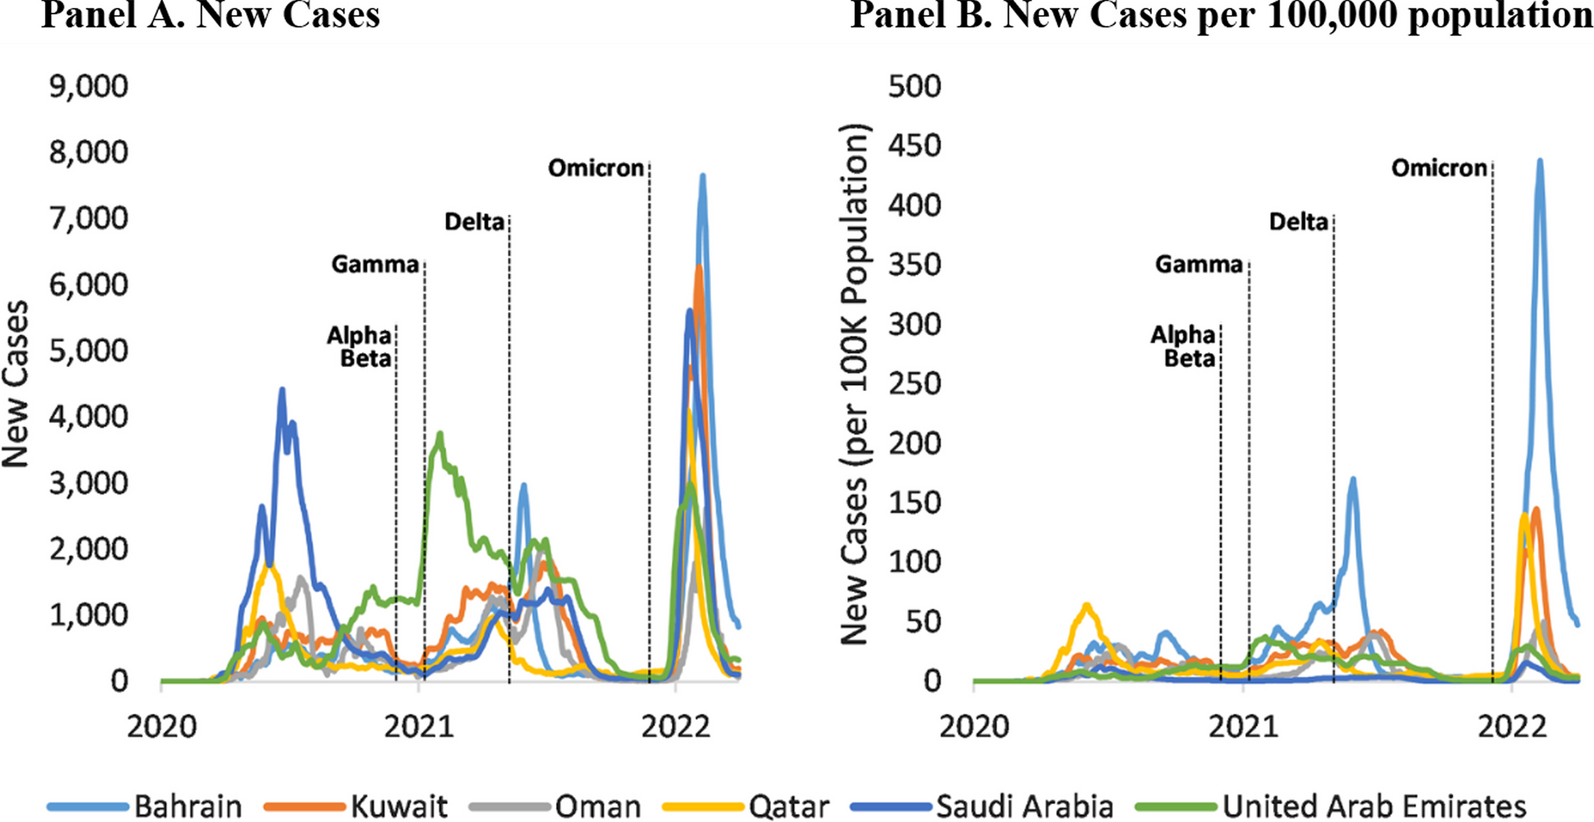 Government responses to the COVID-19 pandemic of the Gulf Cooperation Council countries: good practices and lessons for future preparedness